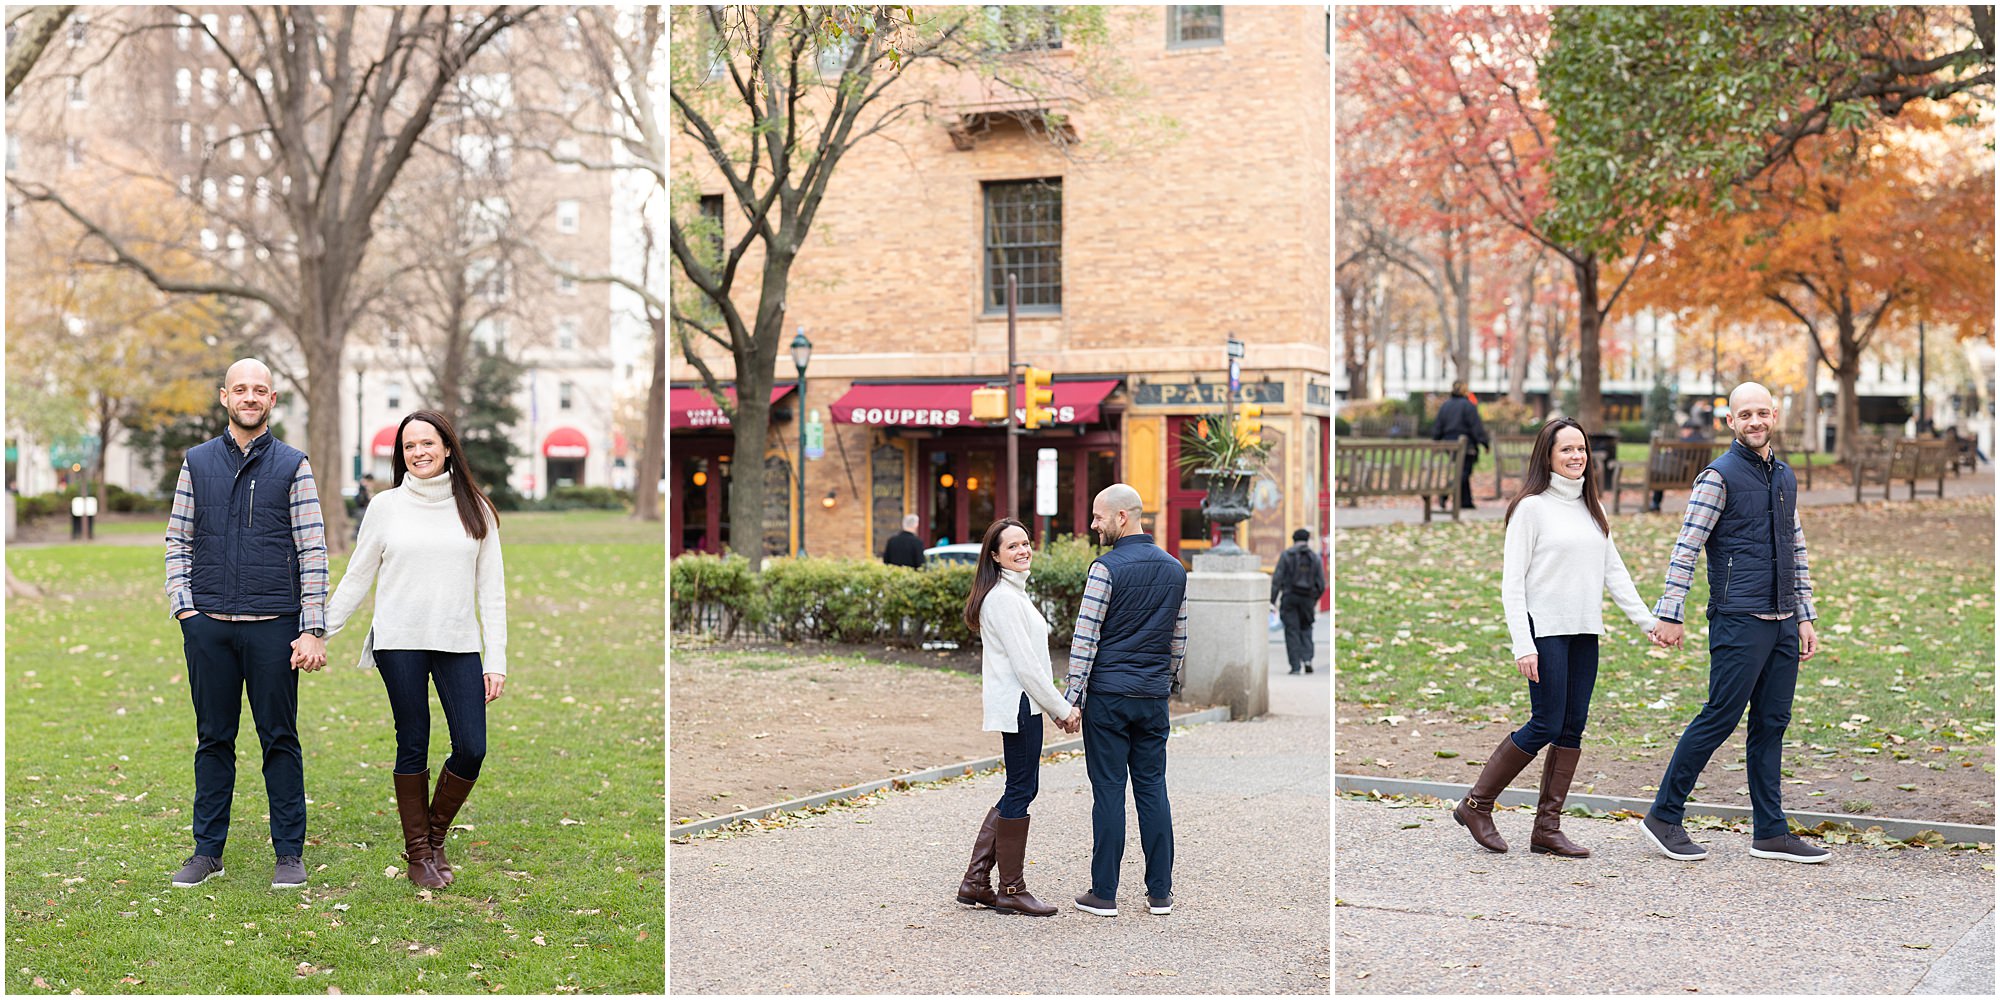 Rittennhouse Square is one of the best lcoations for an engagement session in Philly